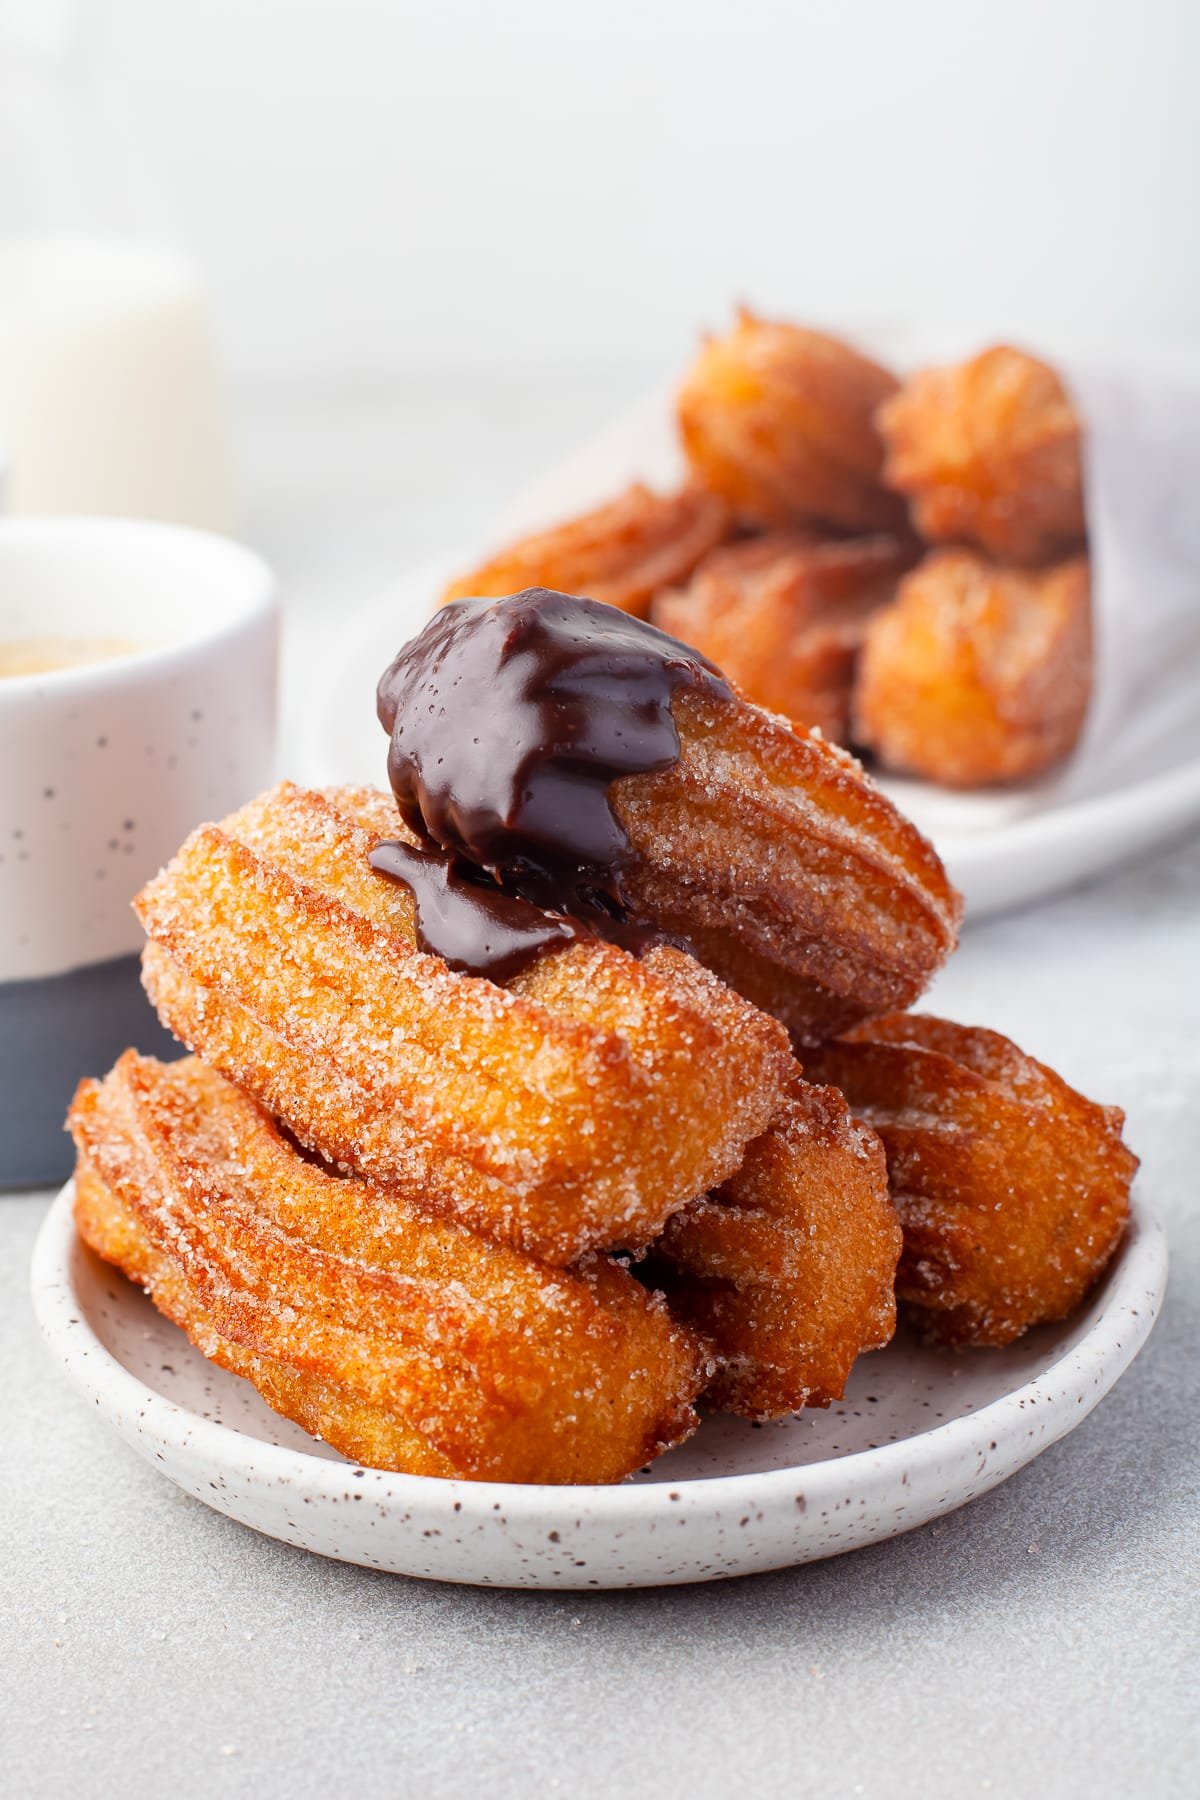 mini churros stacked and dipped in chocolate